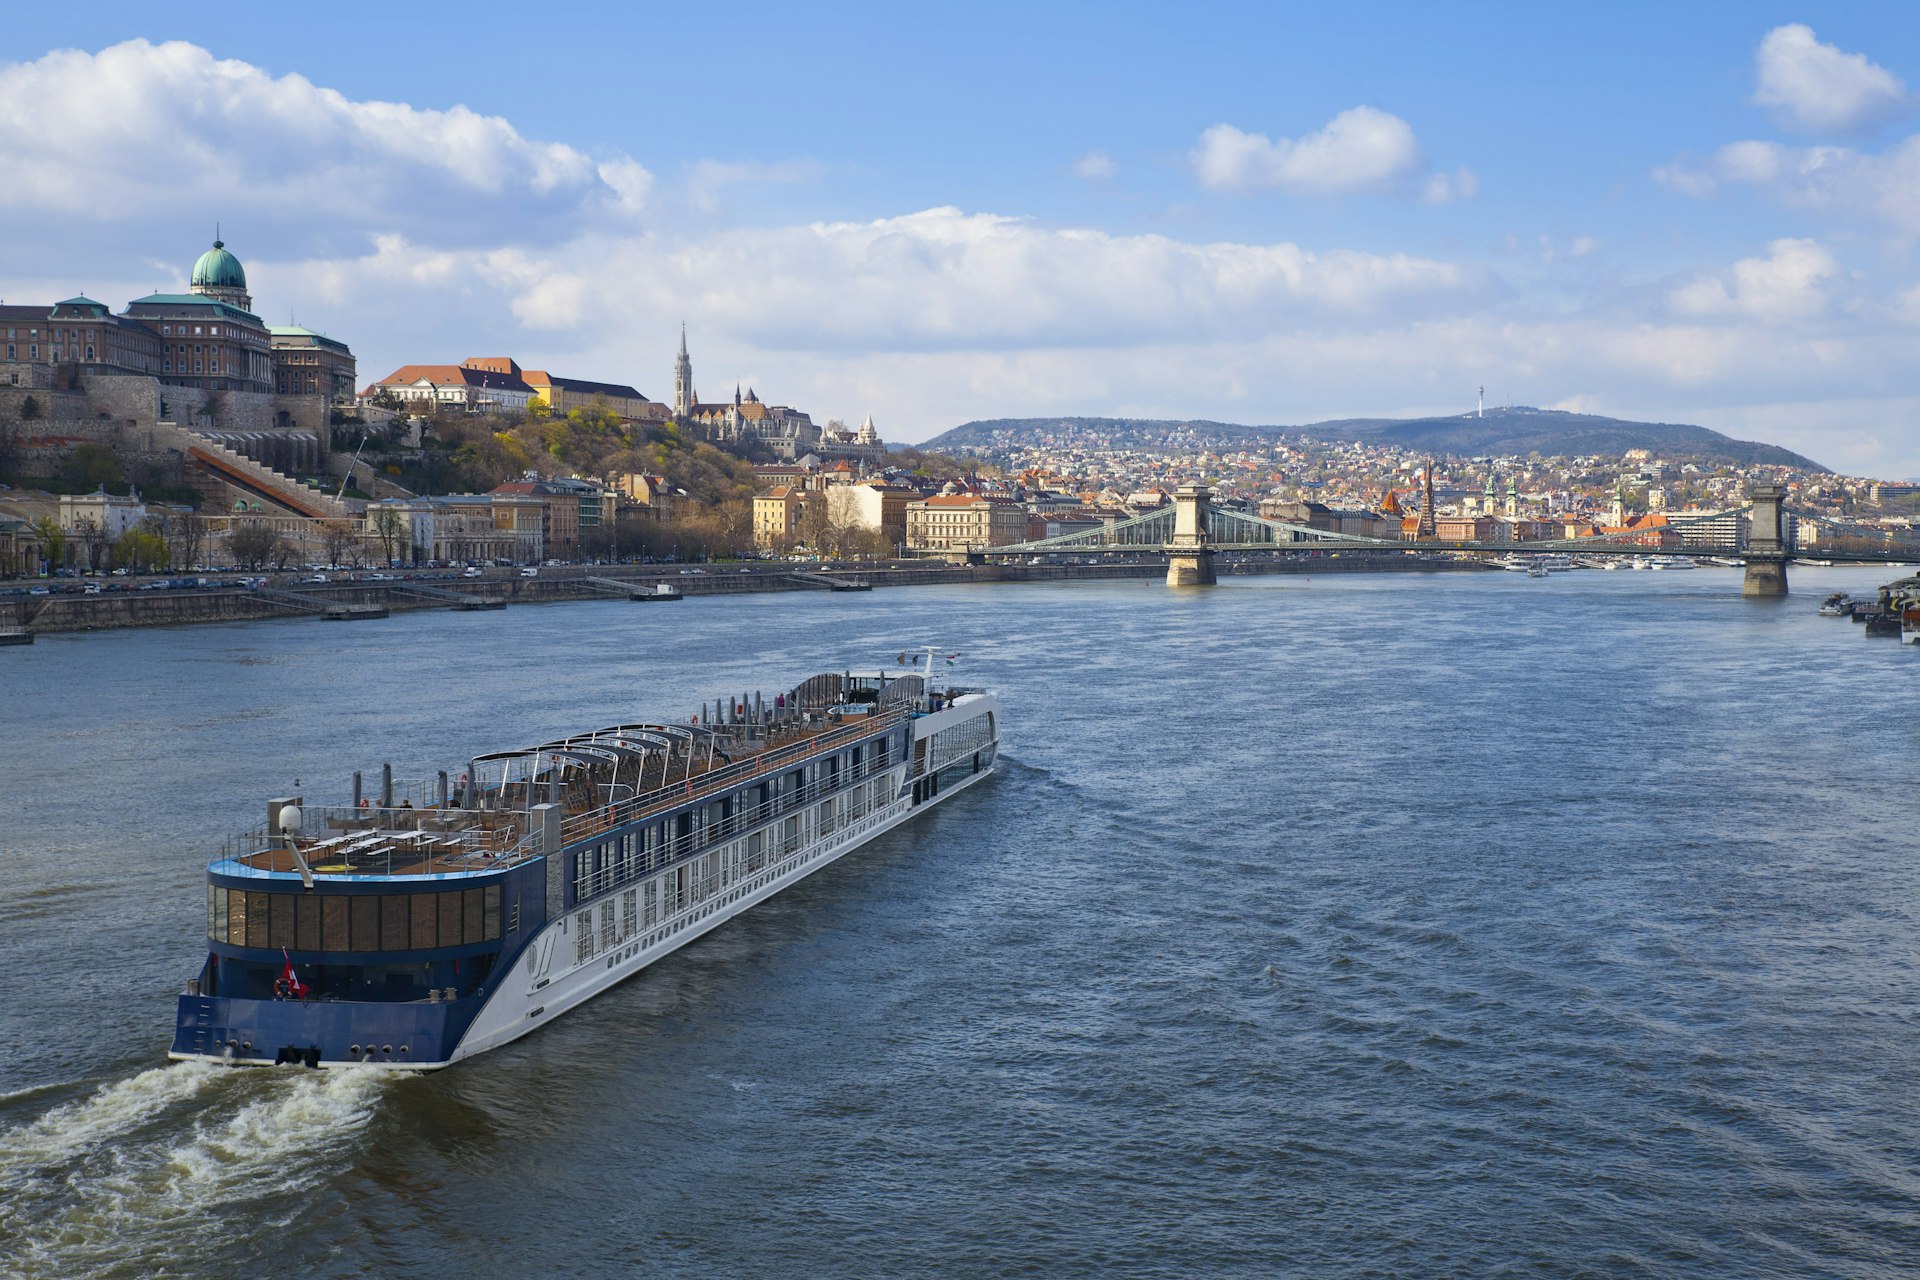 Ferry travelling along the Danube in Budapest.